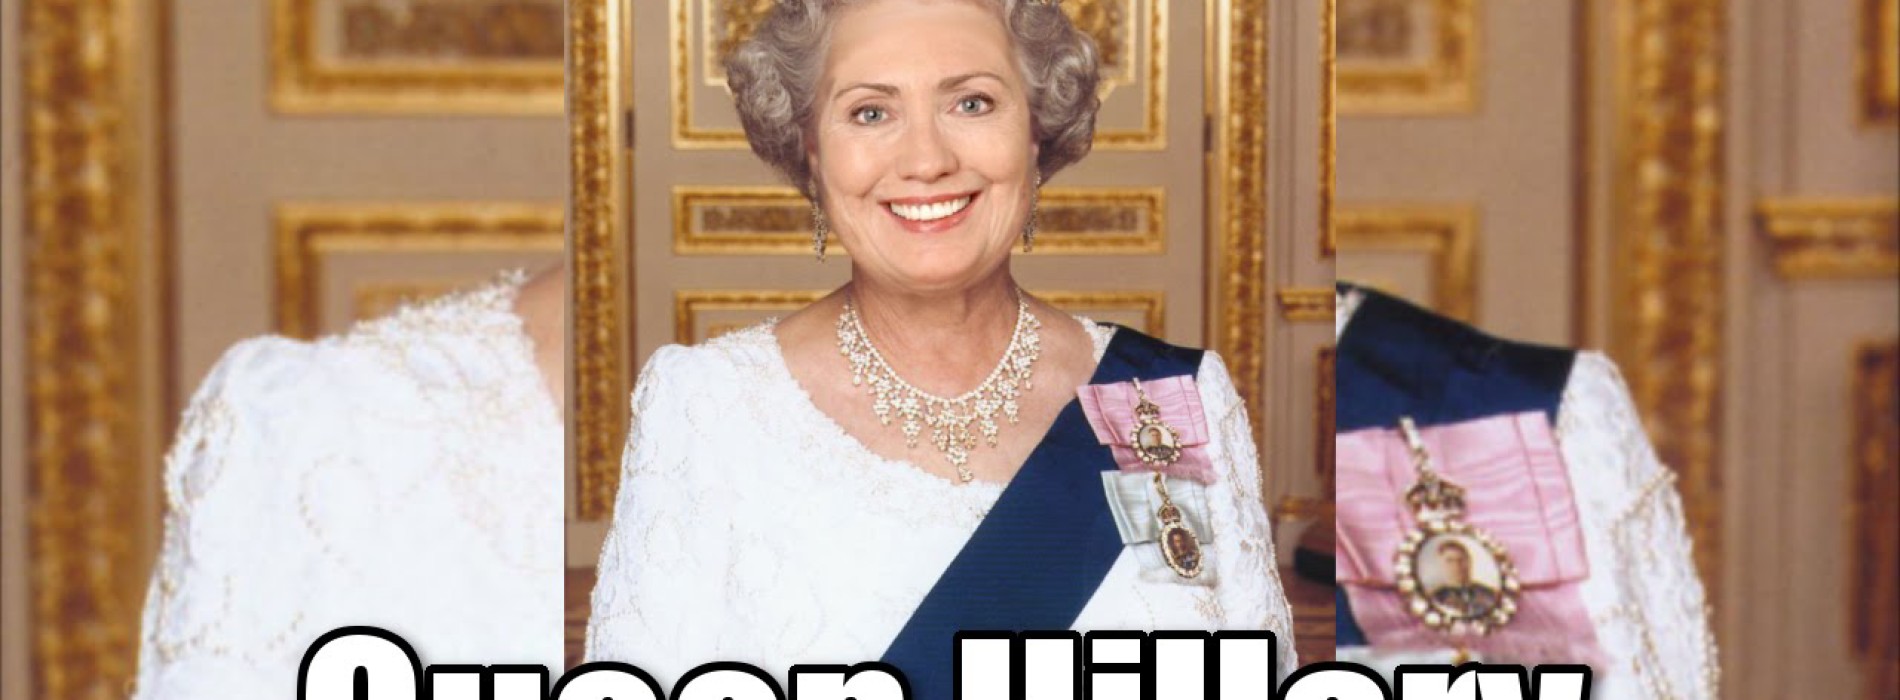 Watch what happens when one of Hillary’s royal subjects misbehaves